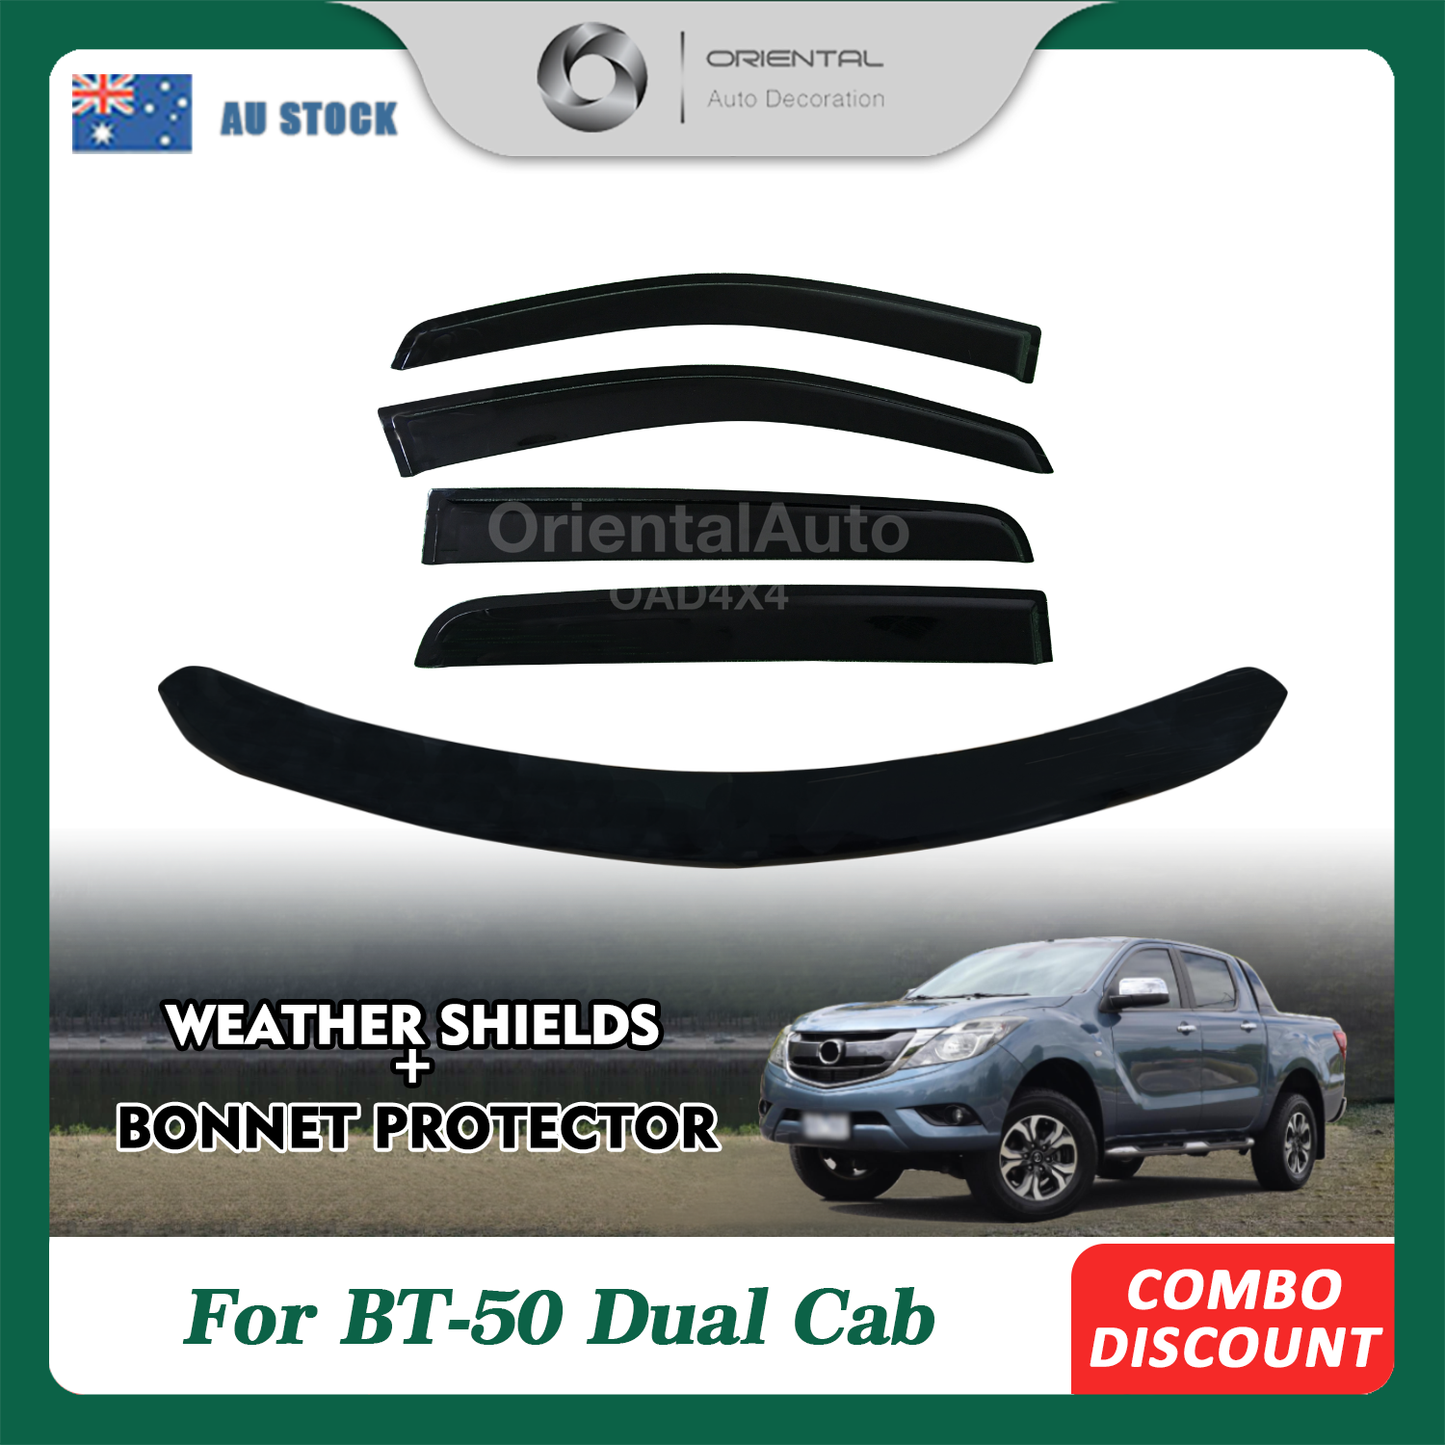 OAD Bonnet Protector & Injection Weathershields Weather Shields Window Visor for Mazda BT-50 BT50 Dual Cab 2011-2020